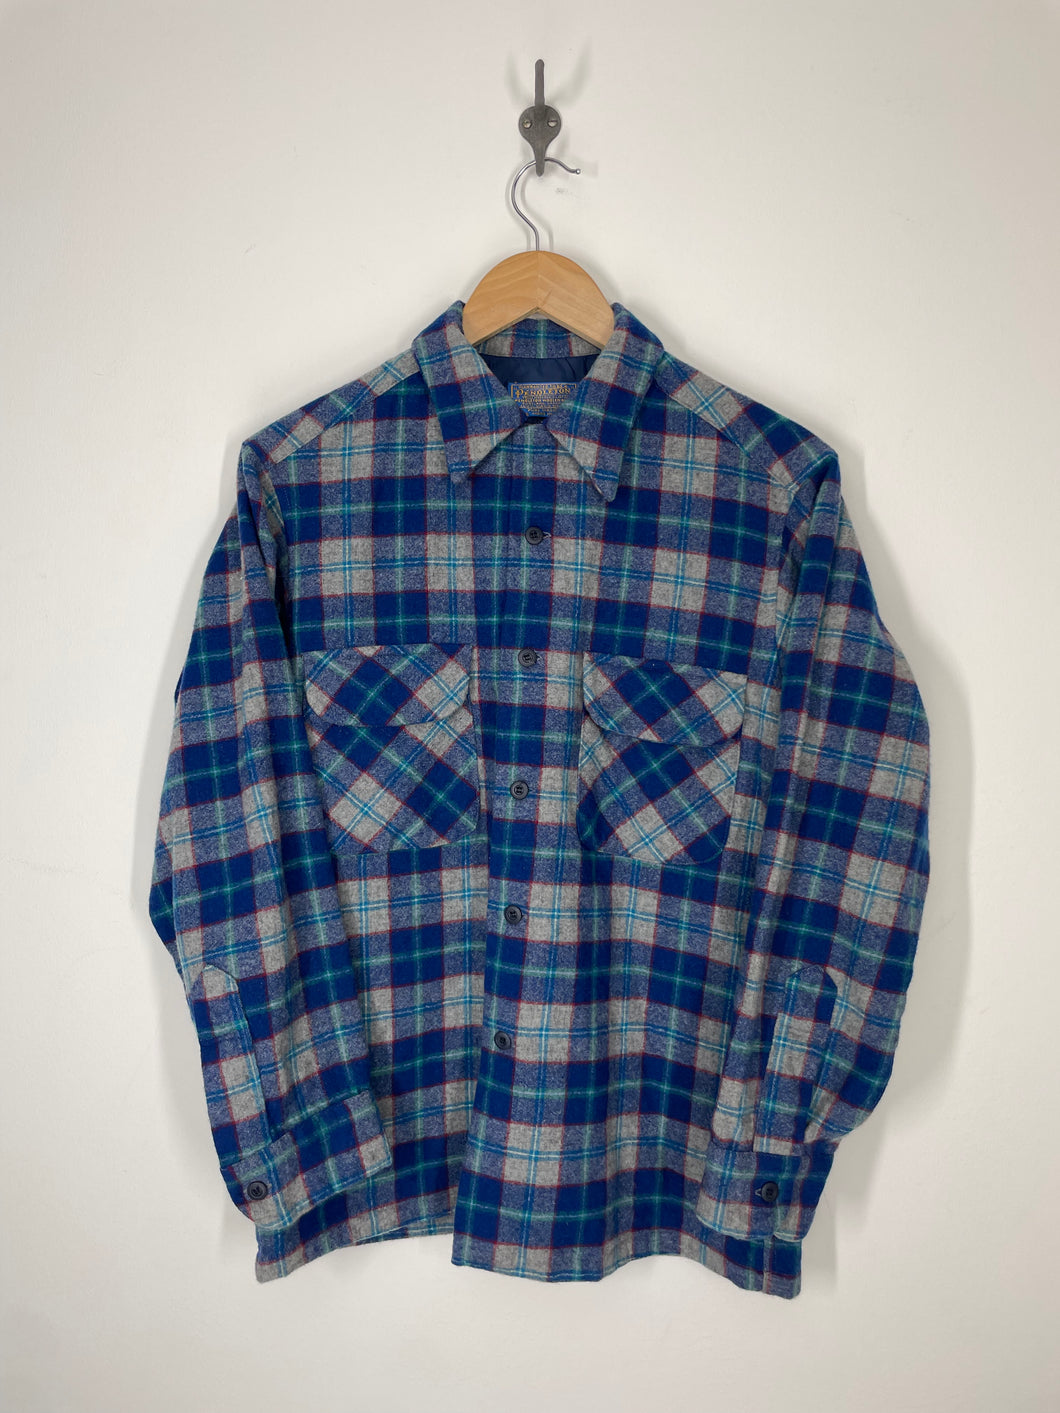 70s Pendleton Button Up Wool Flannel Shirt - M